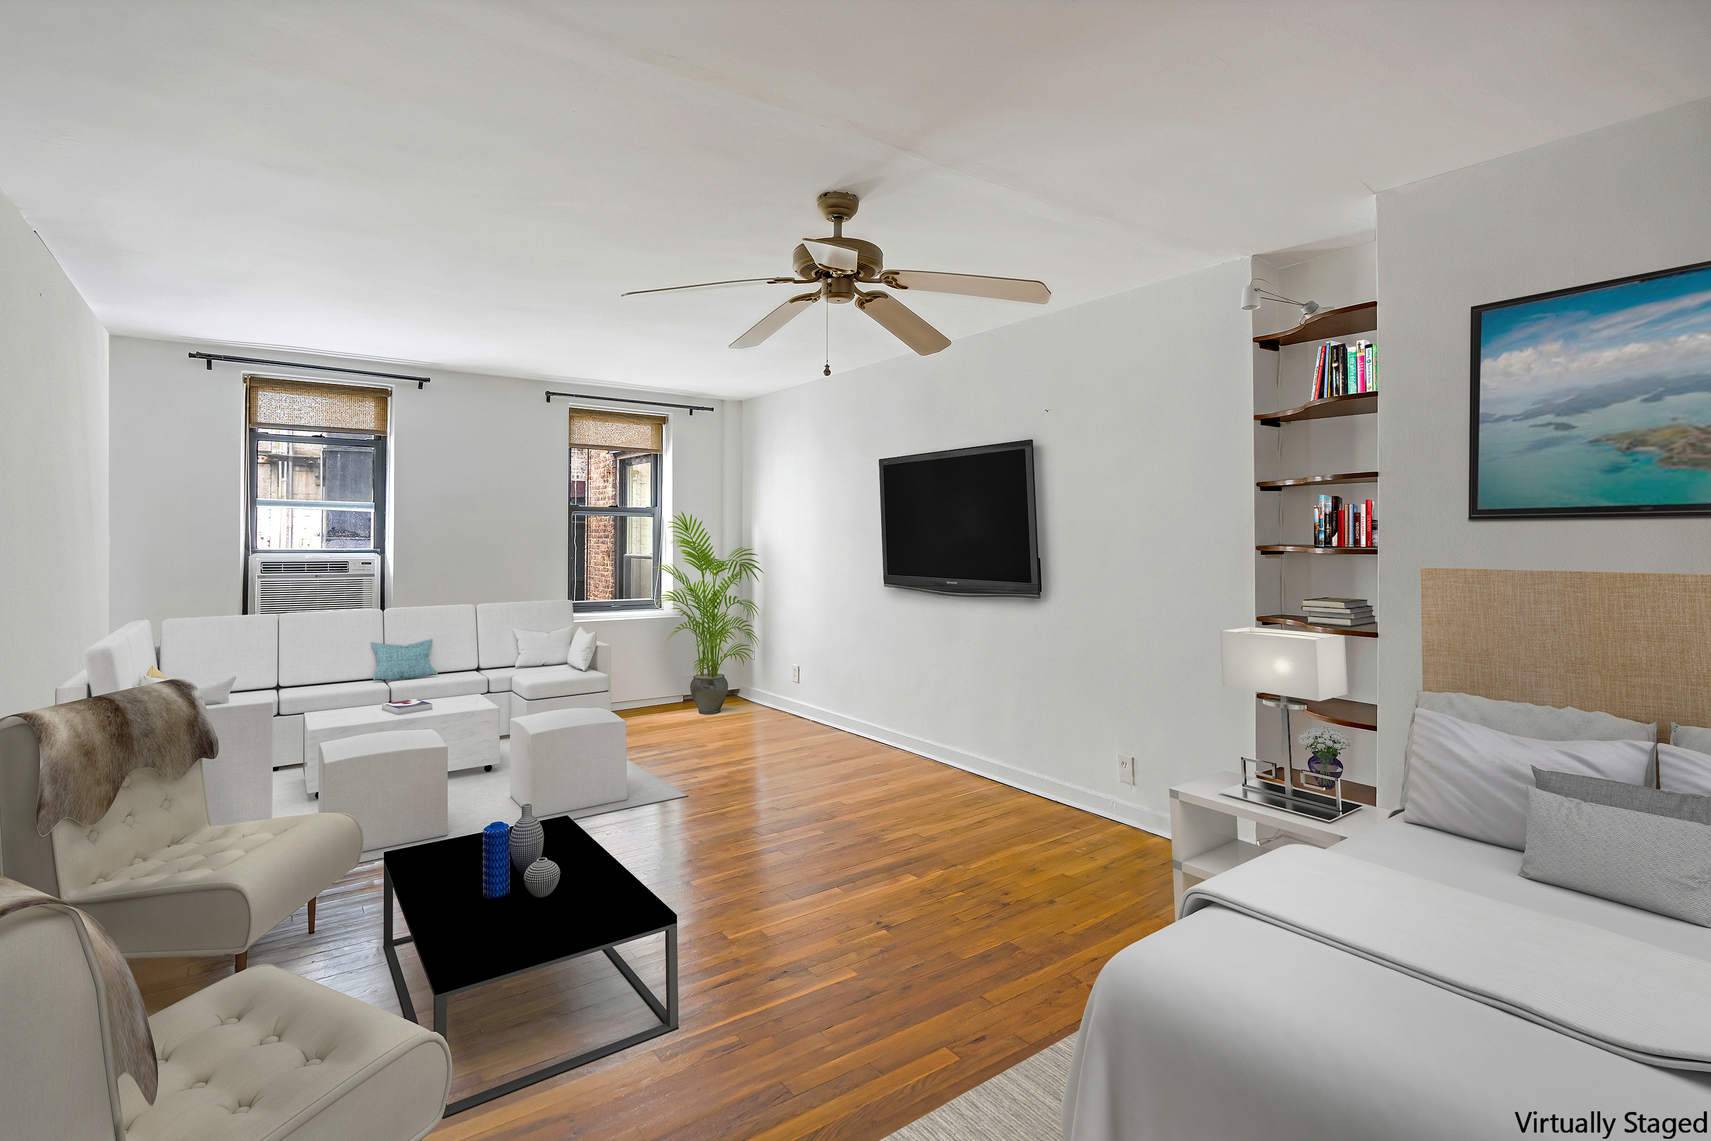 Beautiful, character filled studio home on a prime block, smack in the heart of Flatiron.